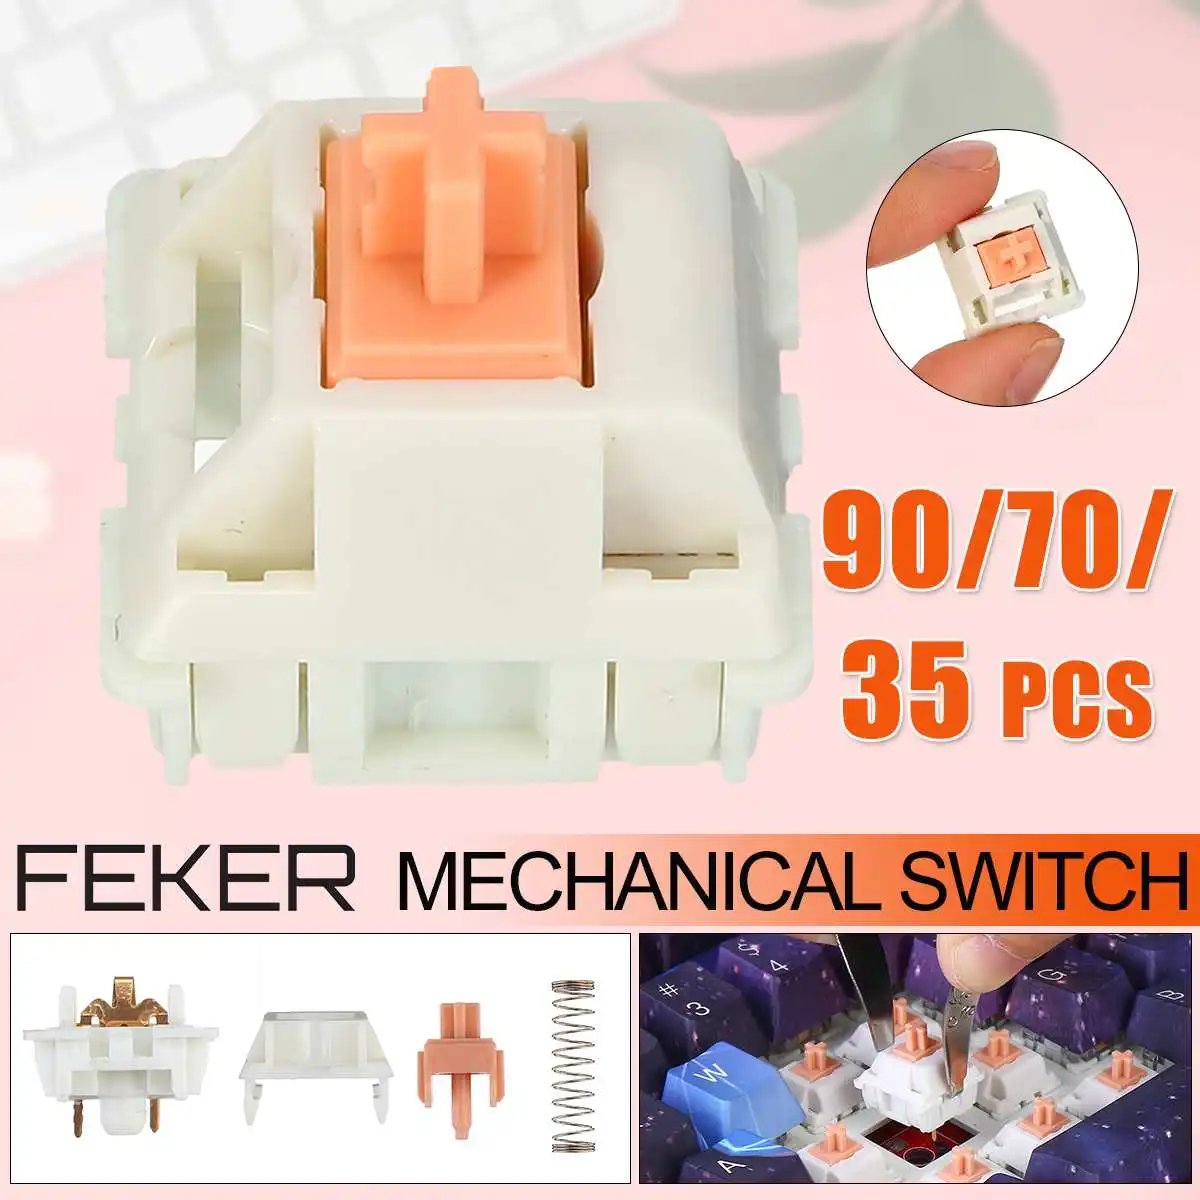 Feker 35/70/90pcs 3 Pin Similar to Holy Panda Switch Mechanical Keyboard Switch Replacement Tactile Polycarbonate Top Housing cute keyboards for computers